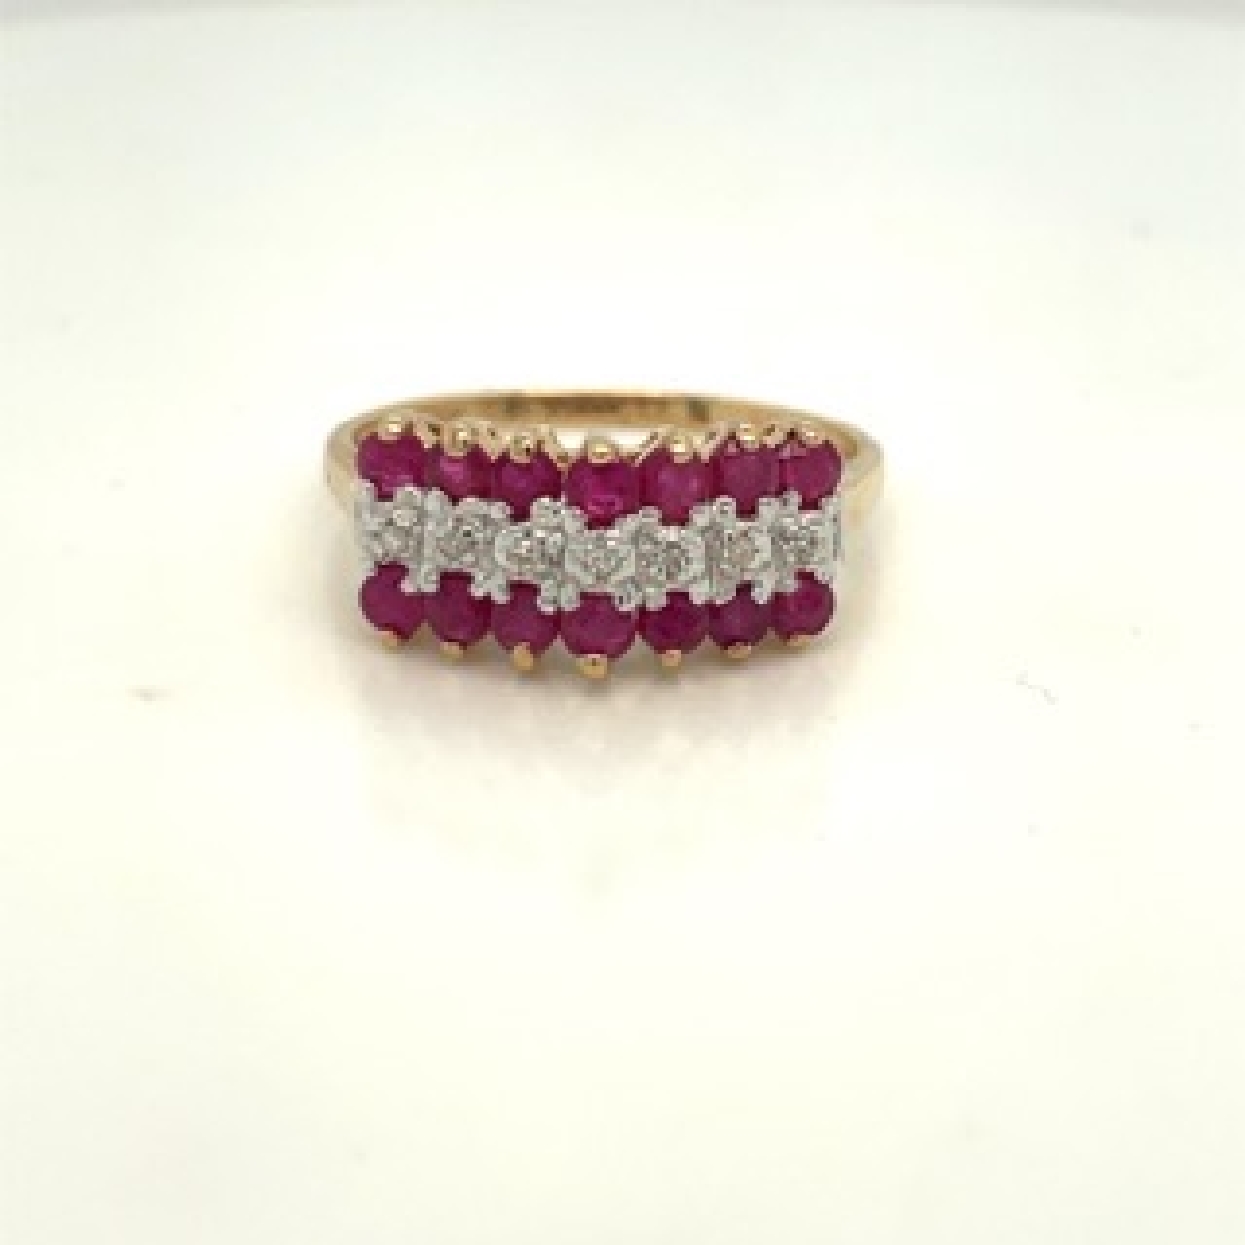 10K Yellow Gold Ruby Ring with Diamond Accents
Size: 8